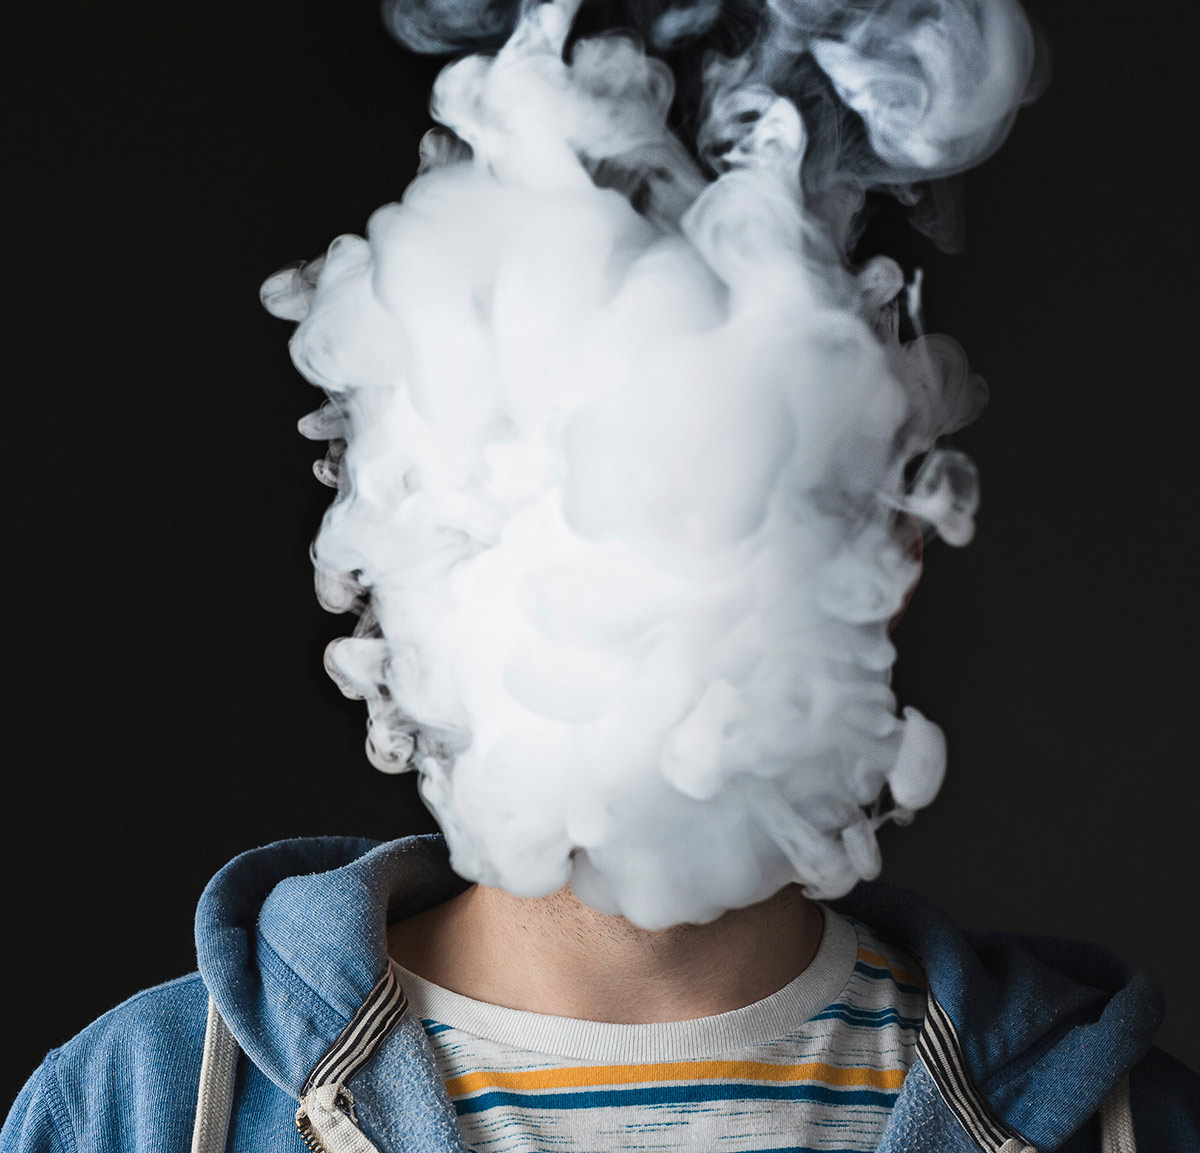 Cloud of smoke completely obscuring person's face